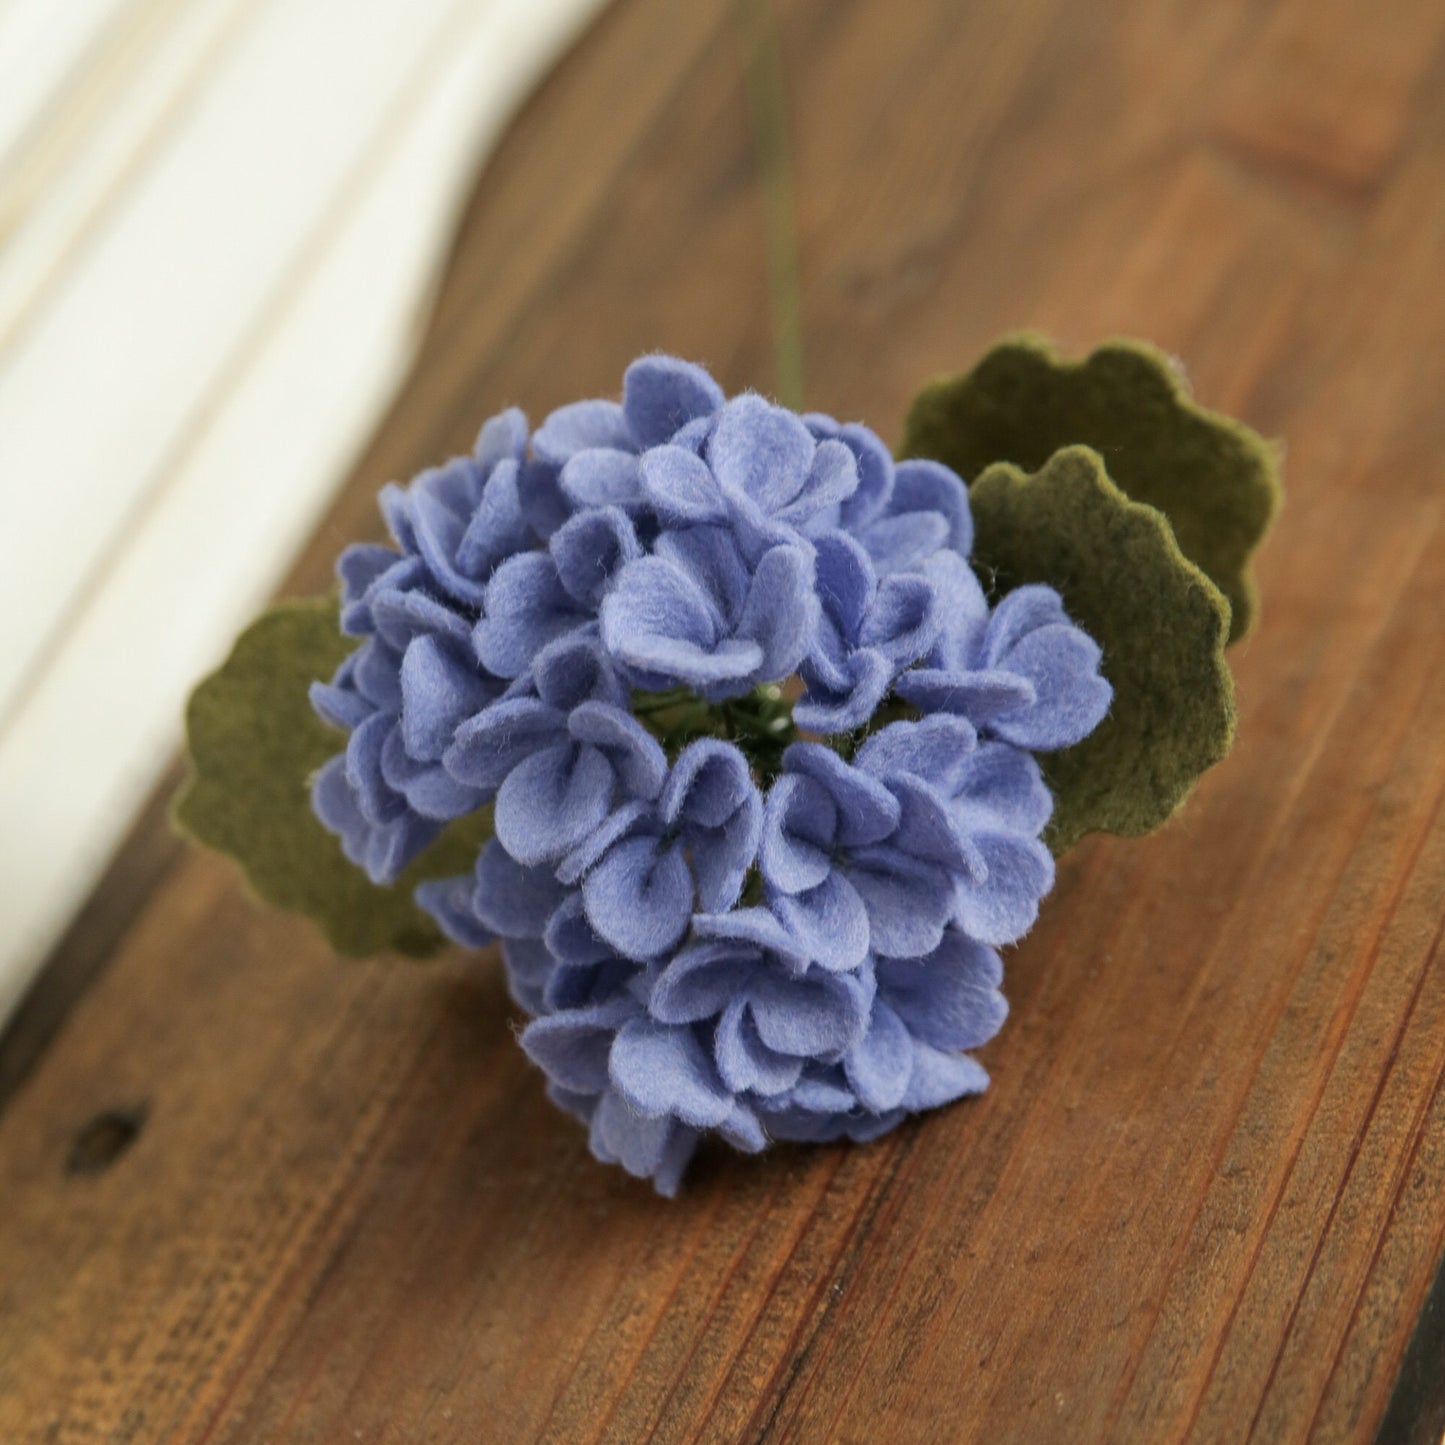 Hydrangea Stem with Leaves